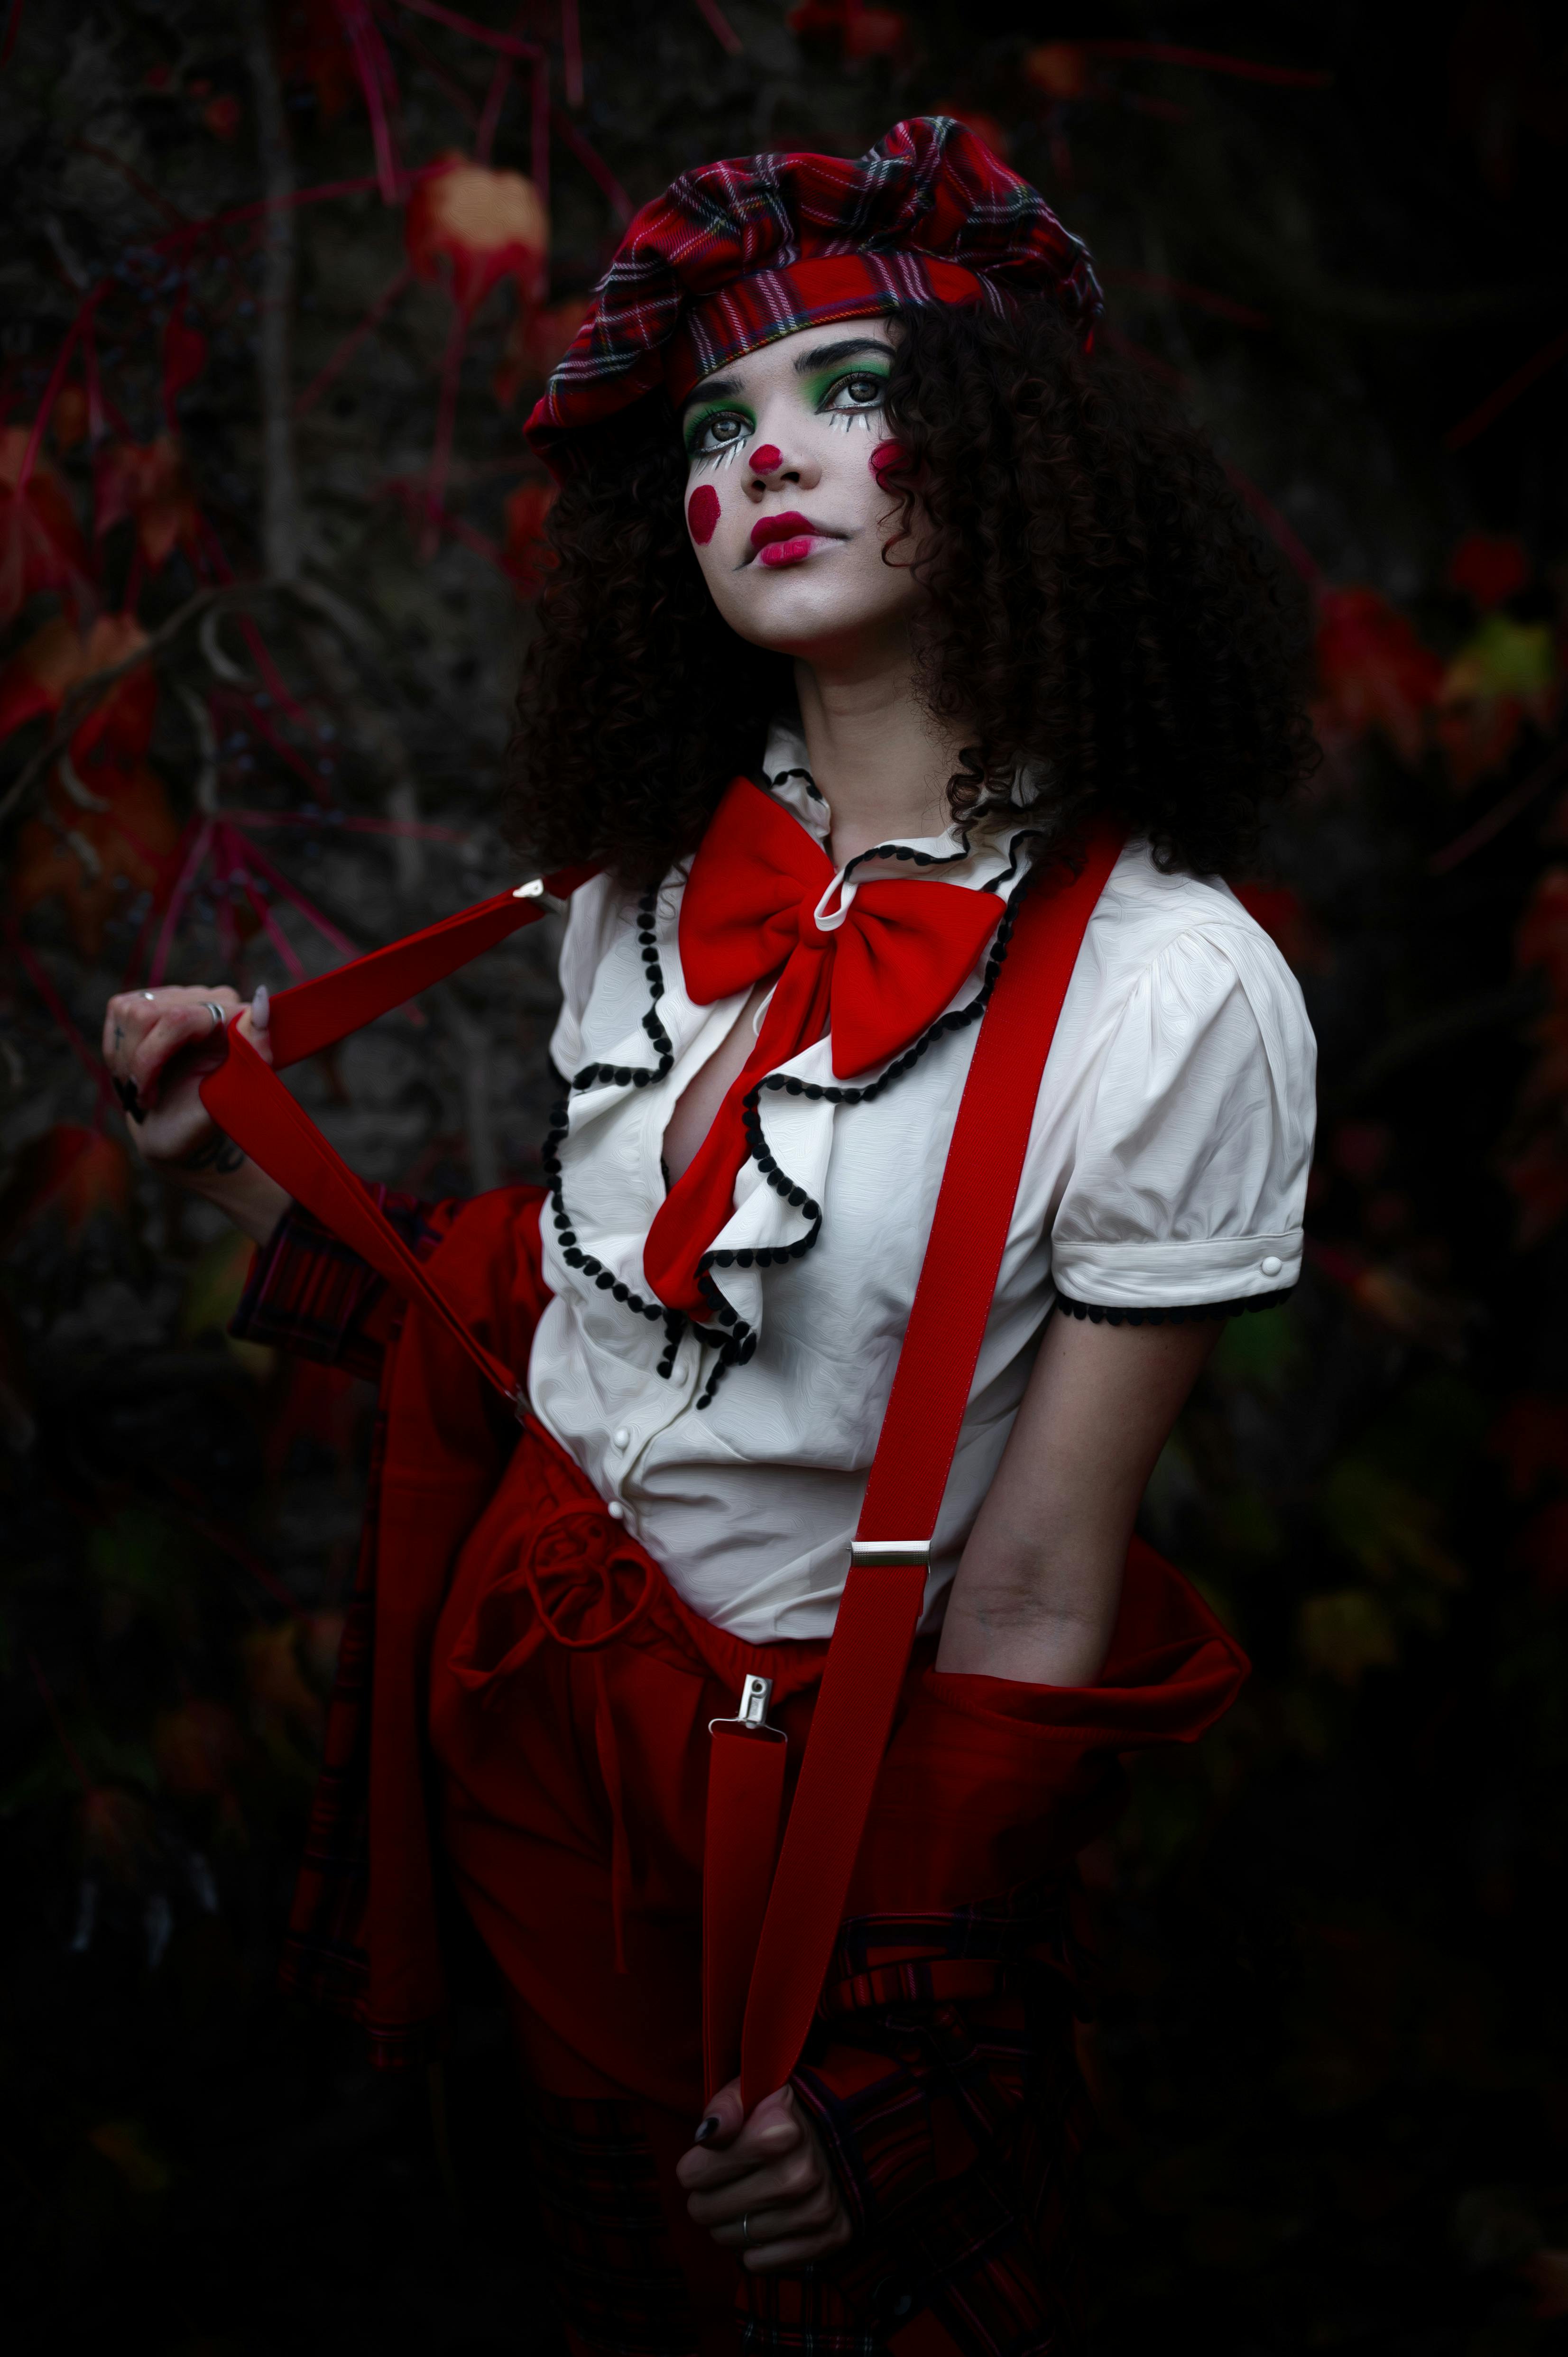 free photo of young woman in a clown costume